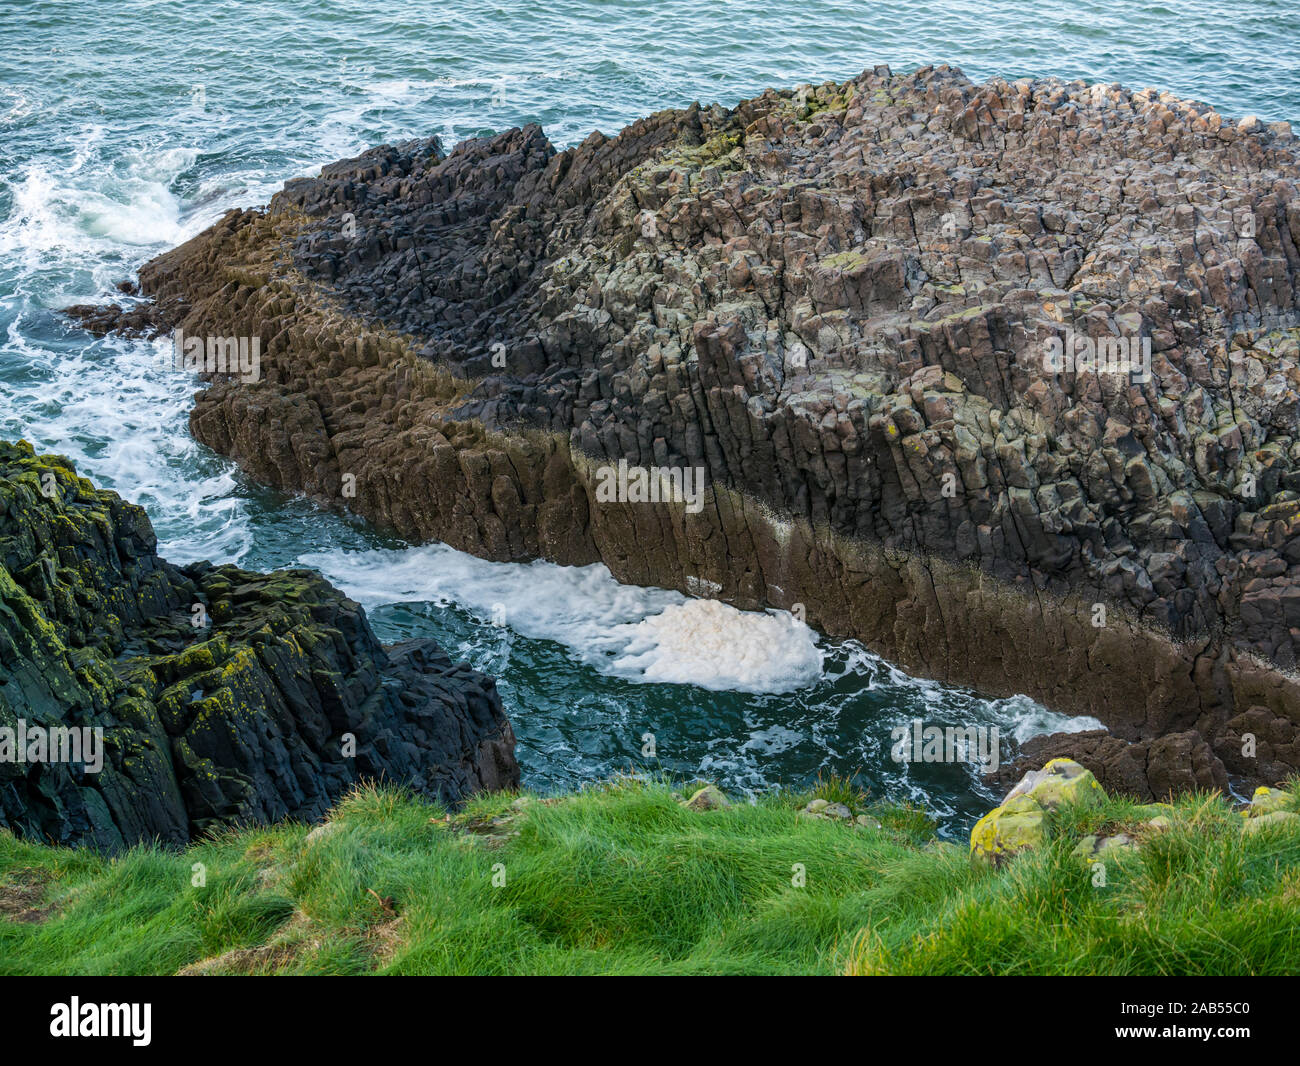 Froth, foam and waves on basalt rocky shore inlet, Lamb Island, Firth of Forth, Scotland, UK Stock Photo